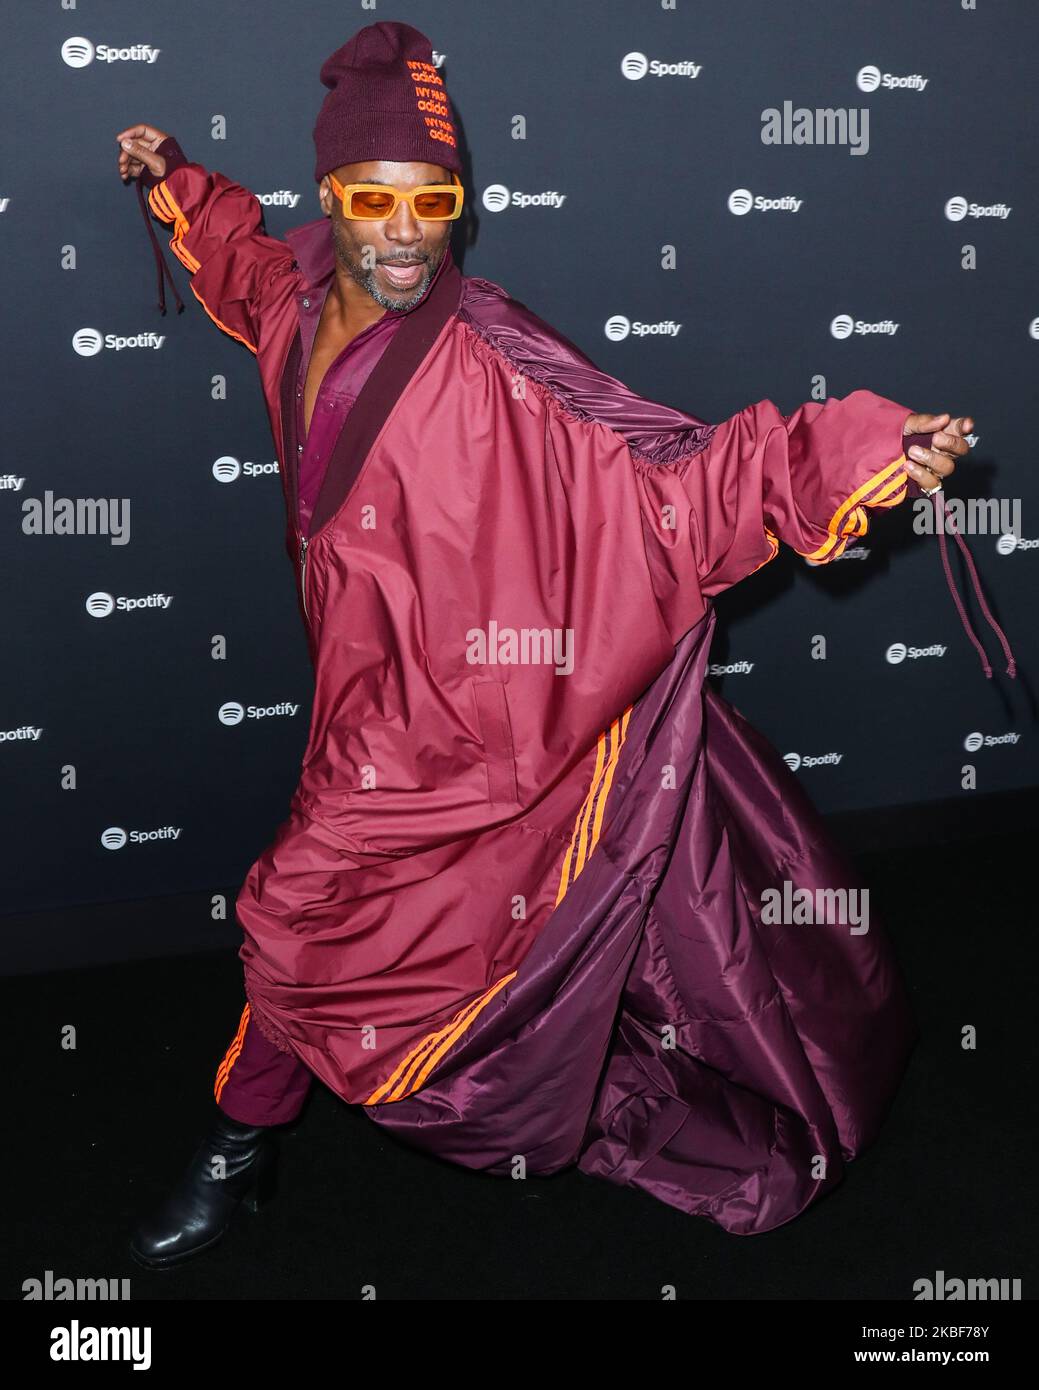 WEST HOLLYWOOD, LOS ANGELES, CALIFORNIA, USA - JANUARY 23: Billy Porter wearing Adidas x Ivy Park arrives at the Spotify Best New Artist 2020 Party held at The Lot Studios on January 23, 2020 in West Hollywood, Los Angeles, California, United States. (Photo by Xavier Collin/Image Press Agency/NurPhoto) Stock Photo